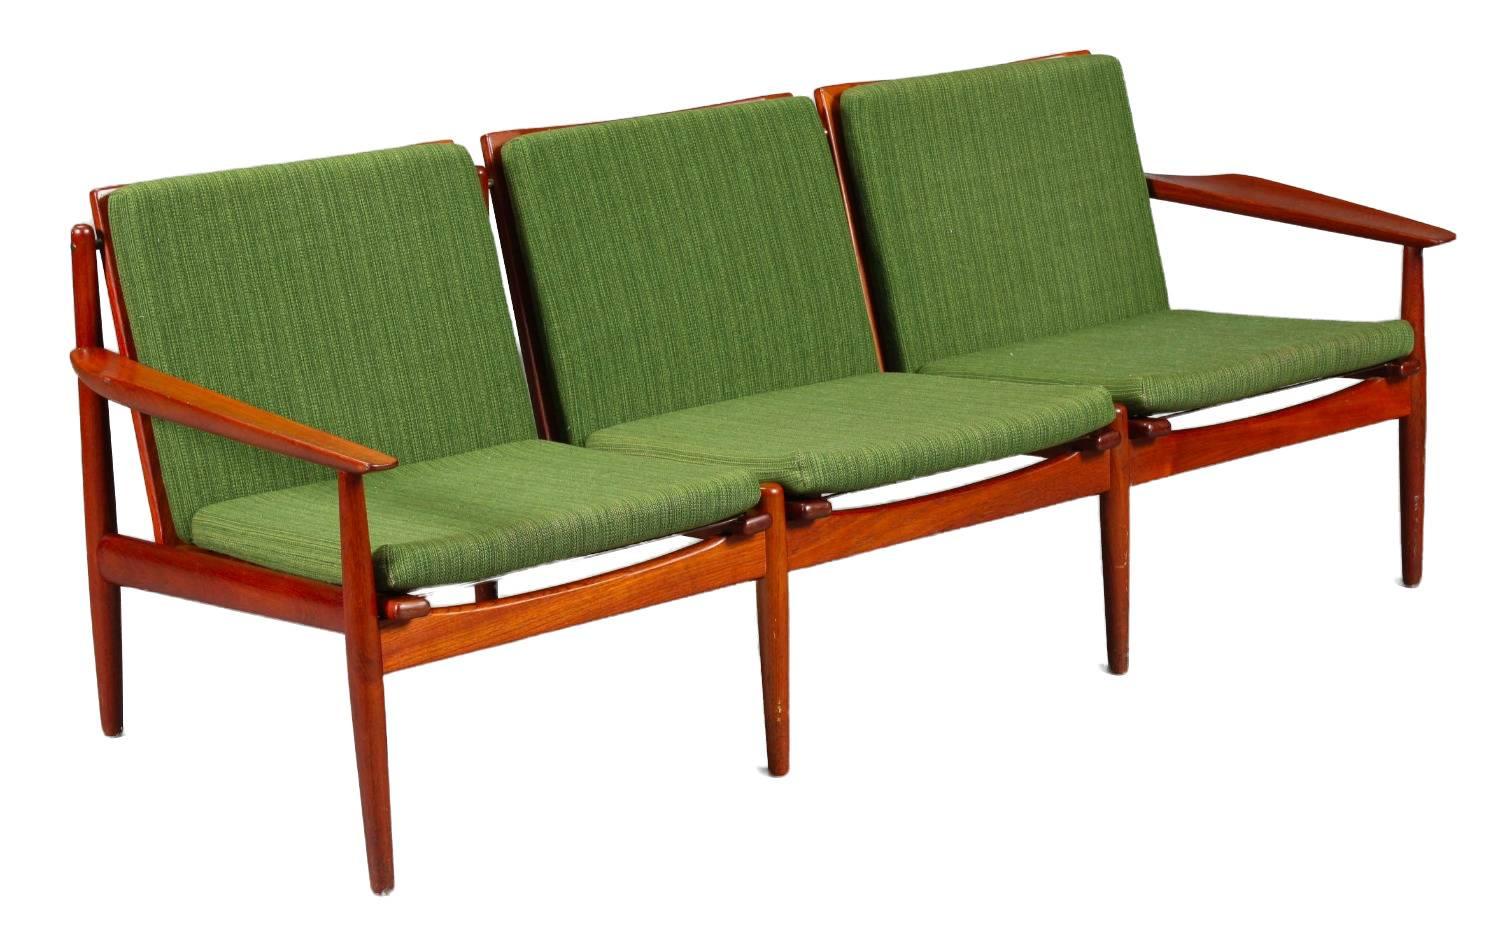 Danish Mid-Century Modern three person couch with green cushions upholstered in wool.

It features a teak frame with a slatted back and turned legs.

It is designed by Arne Vodder in the 1960s and produced at Glostrup Møbelfabrik.

Length: 188